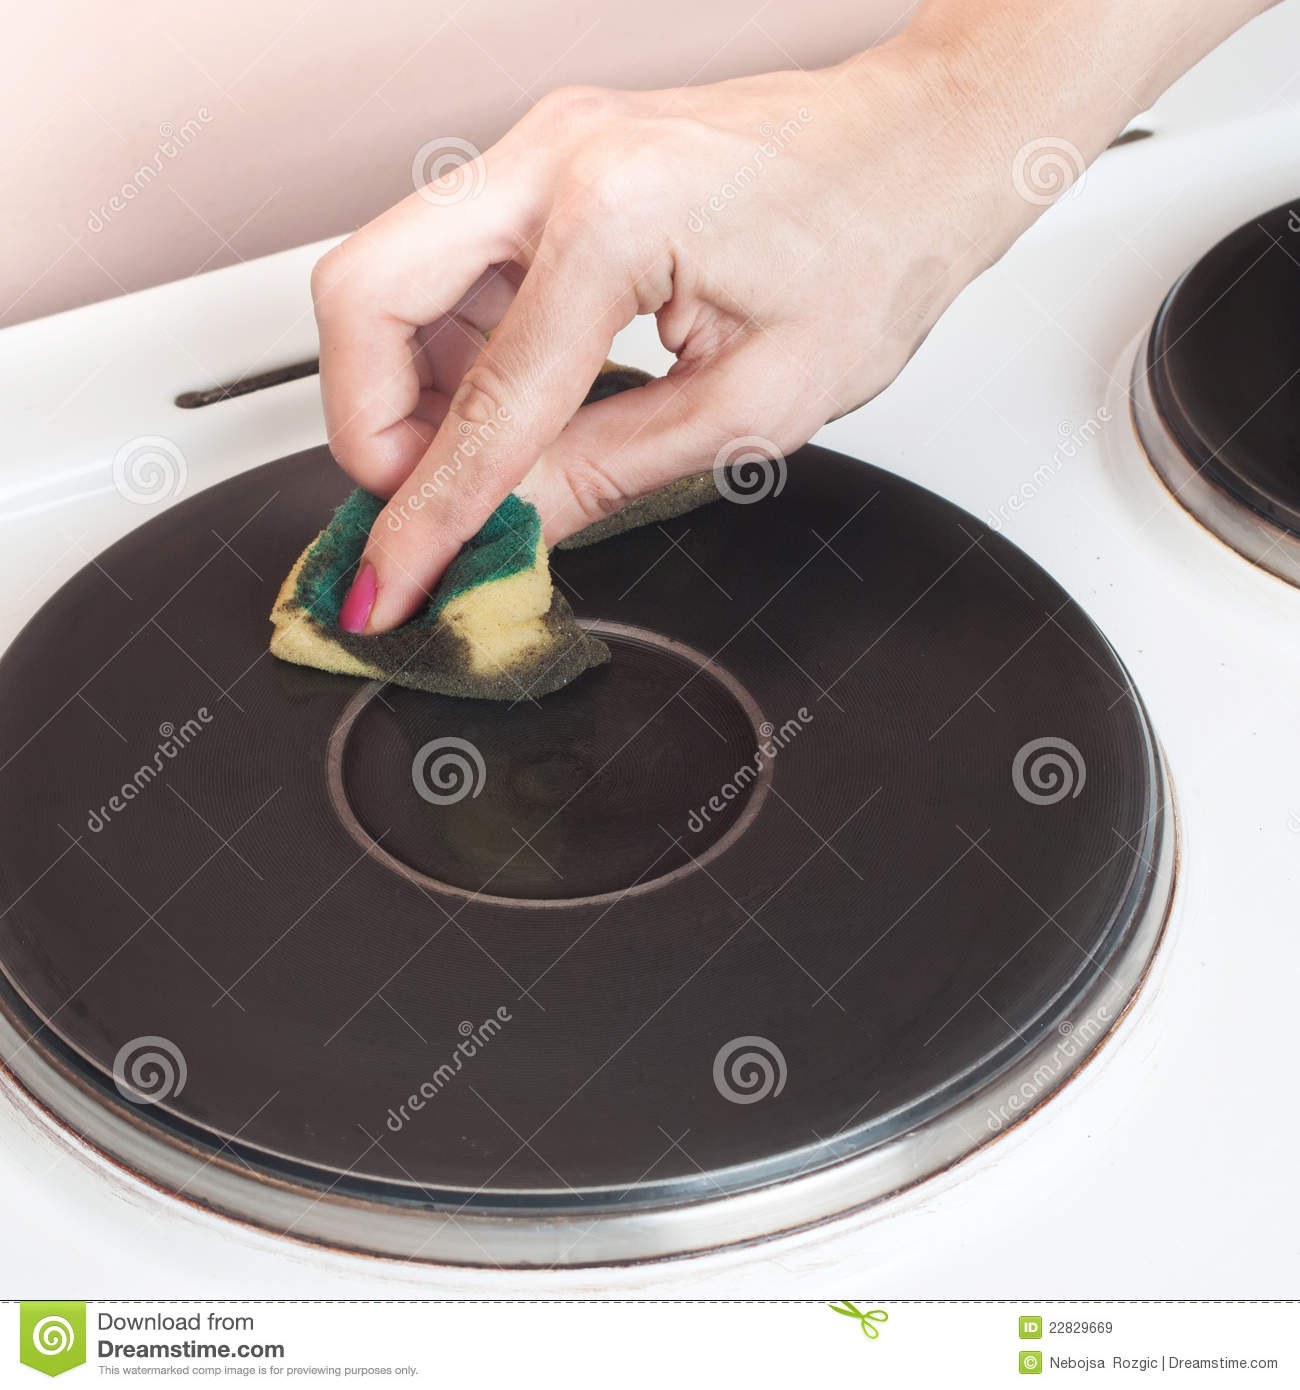 Cleaning Electric Stove Royalty Free Stock Images   Image  22829669